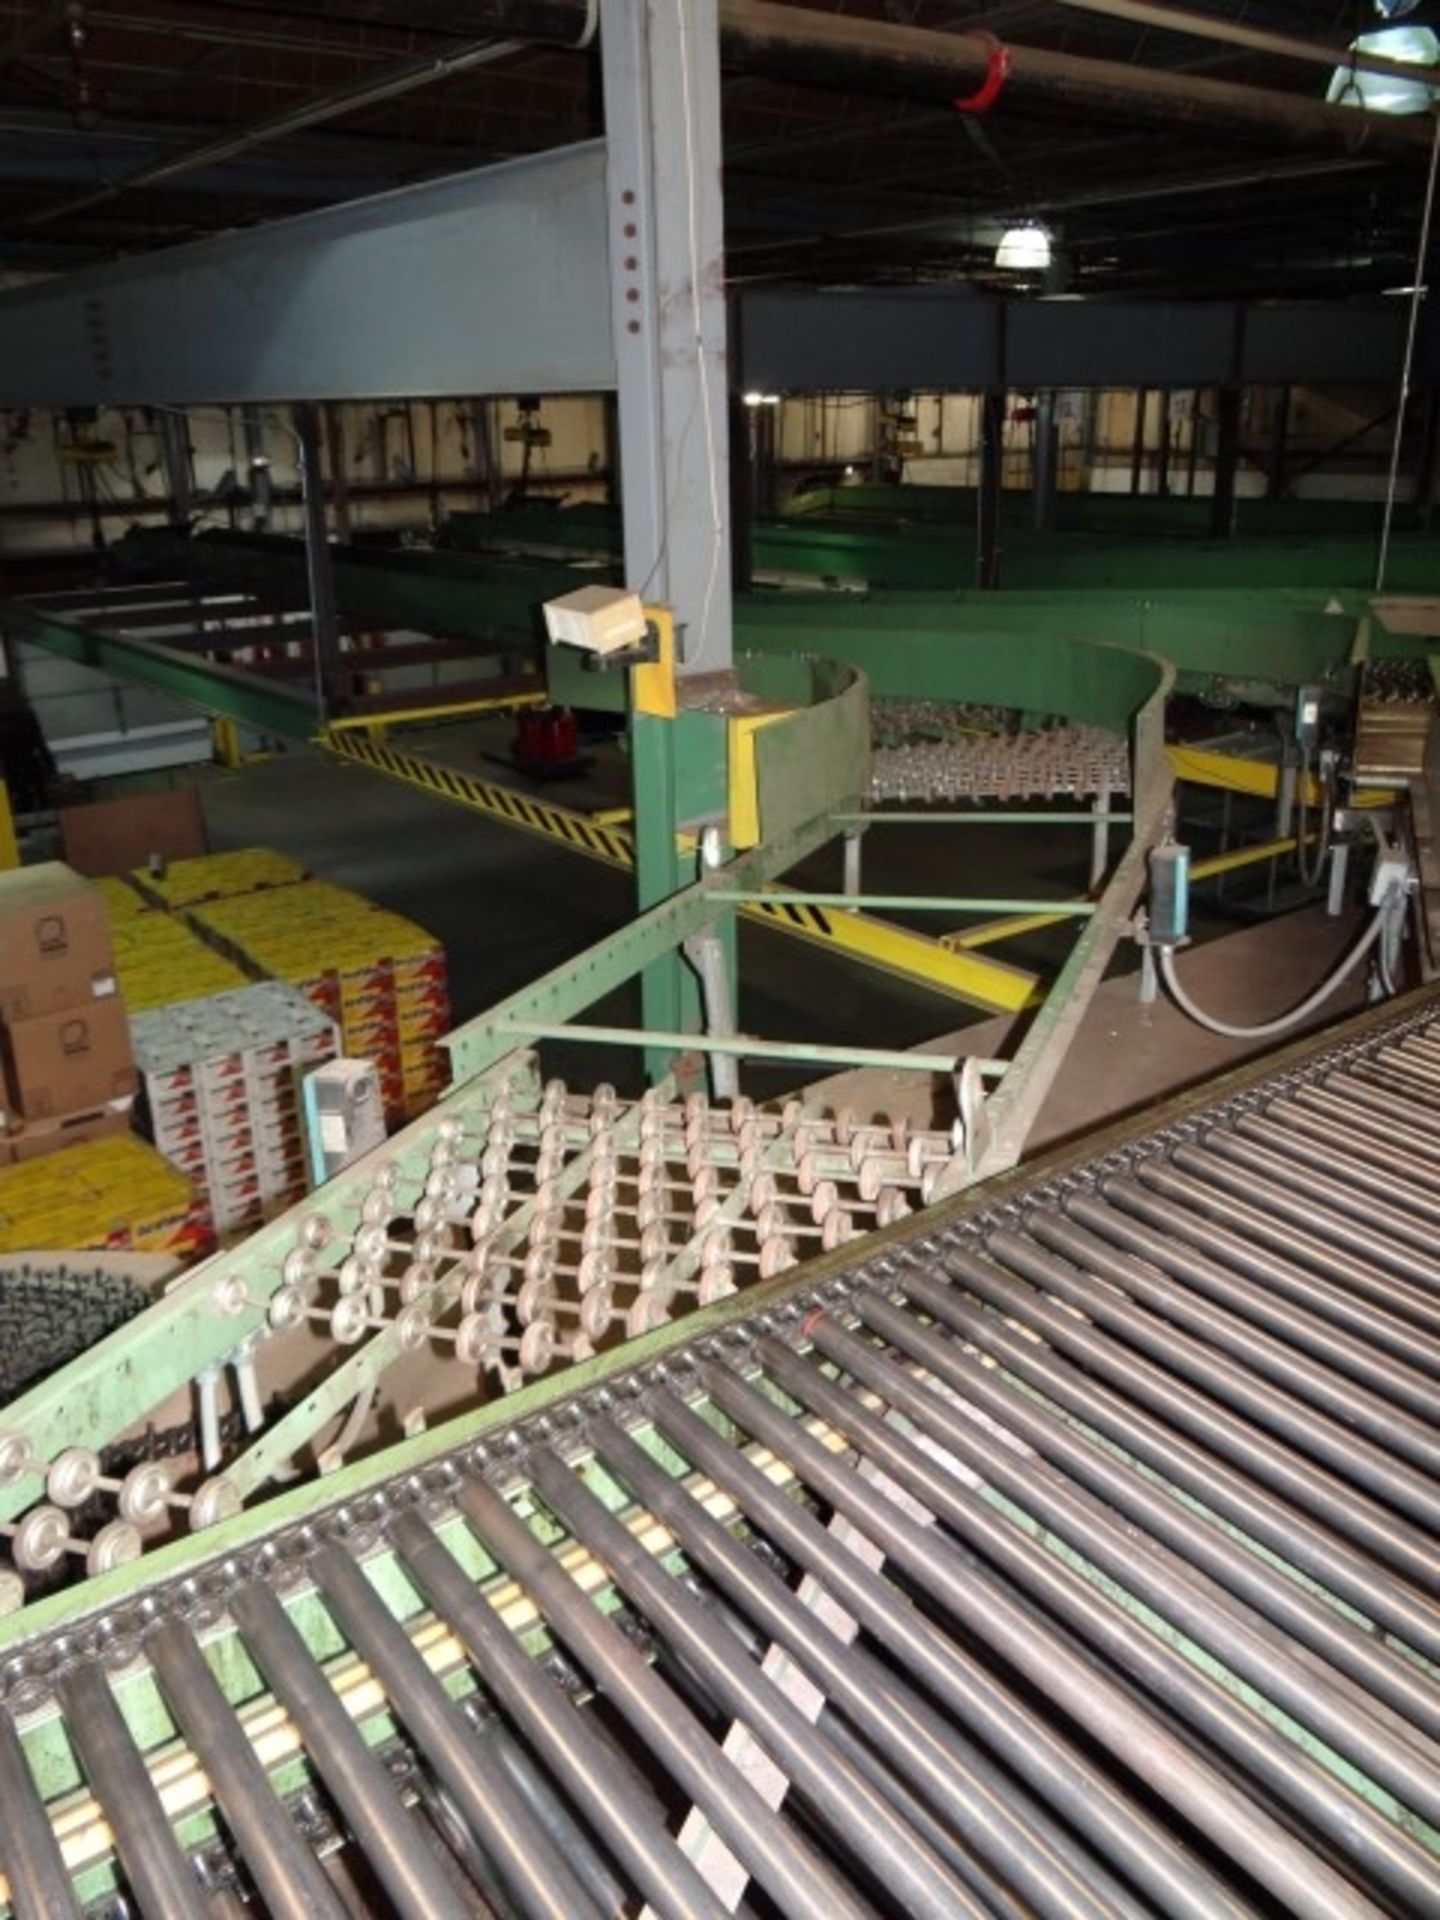 Sortation Line Conveyor, Two Controls, and 6 Drop Down Conveyors - Image 10 of 22